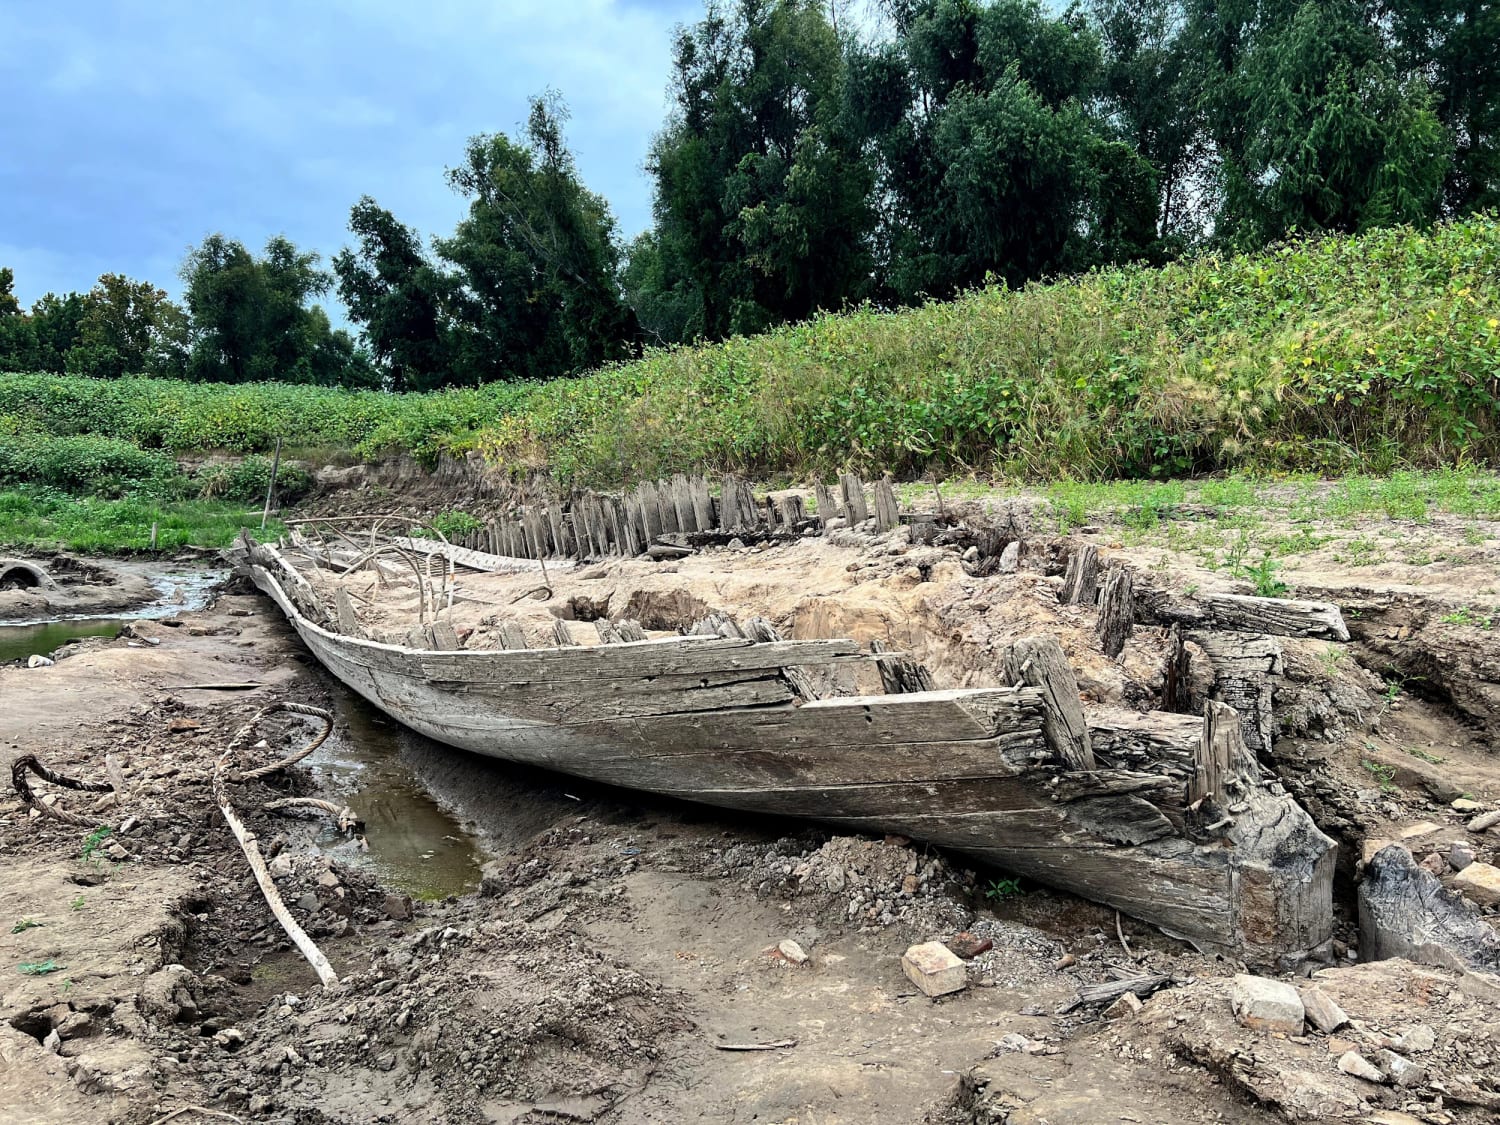 Shipwreck emerges by Mississippi River bank as water level drops